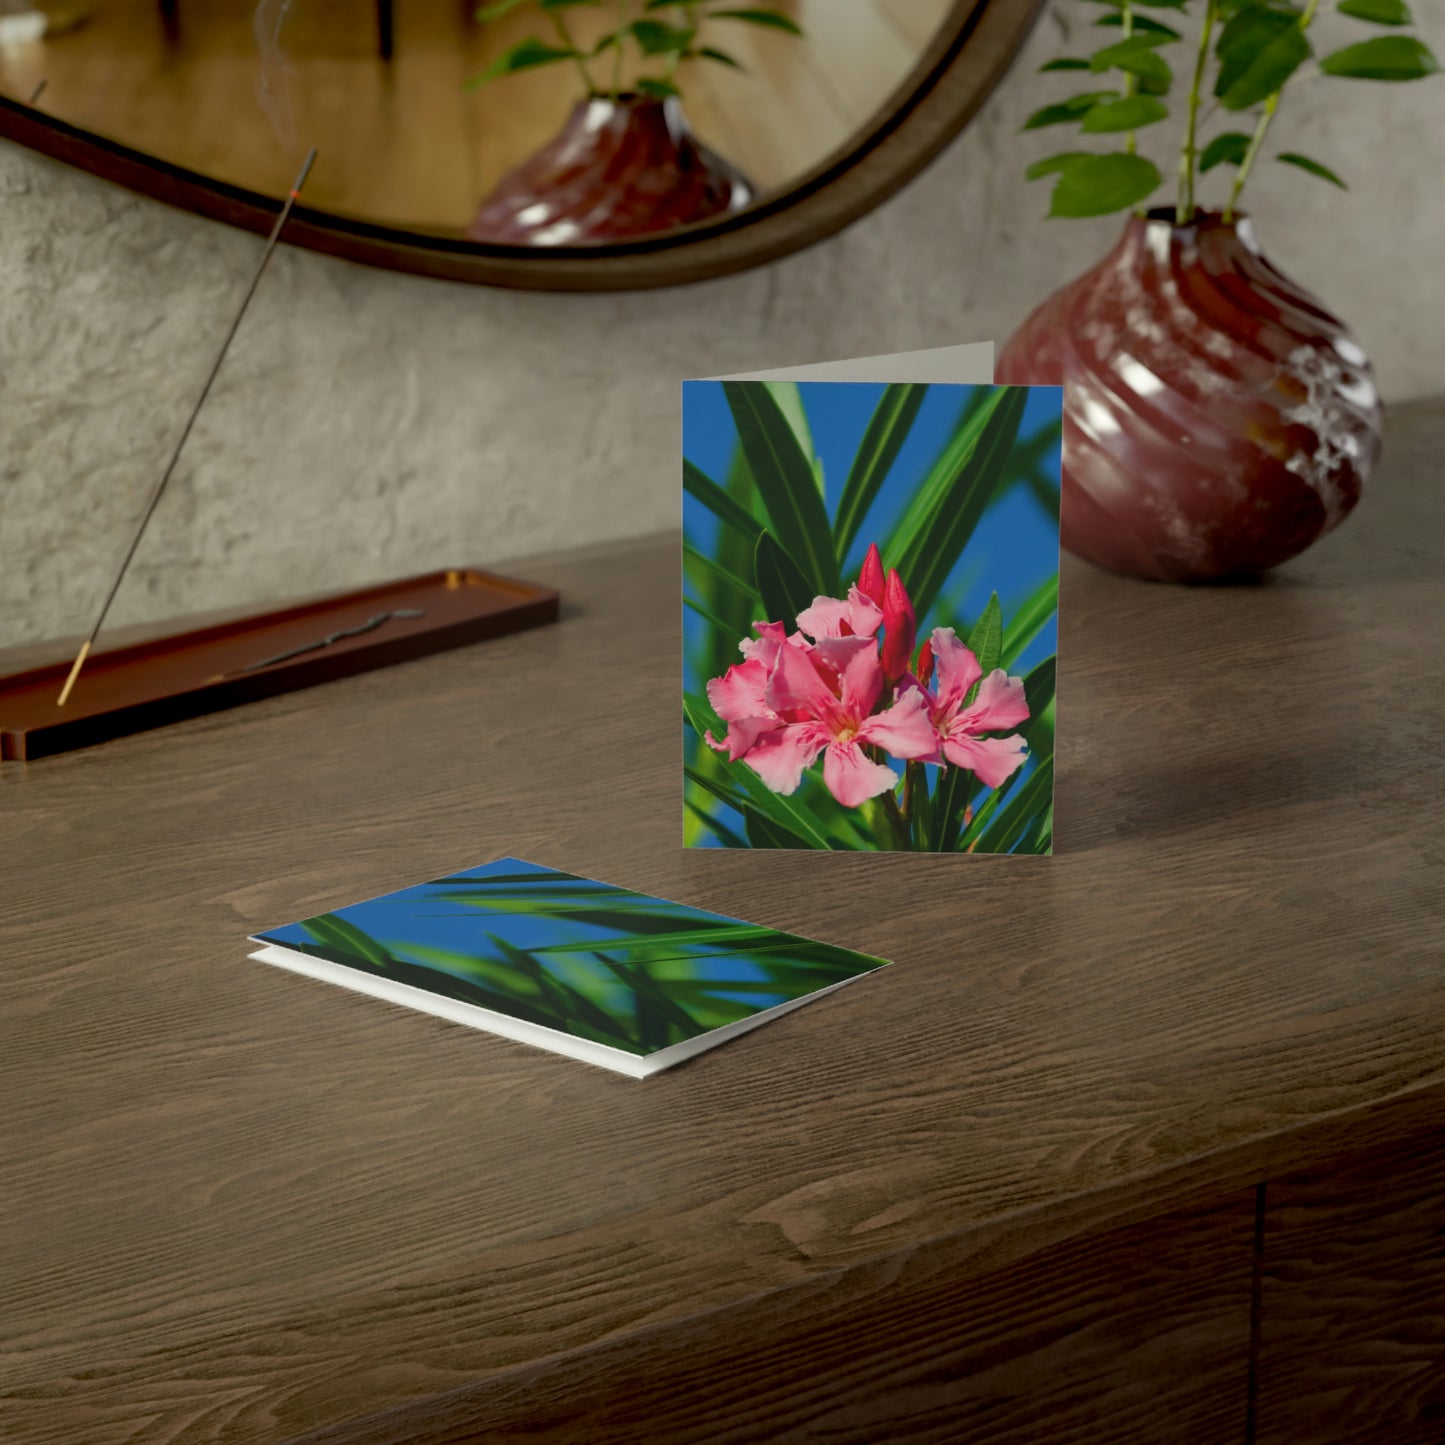 Flowers 30 Greeting Cards (1, 10, 30, and 50pcs)